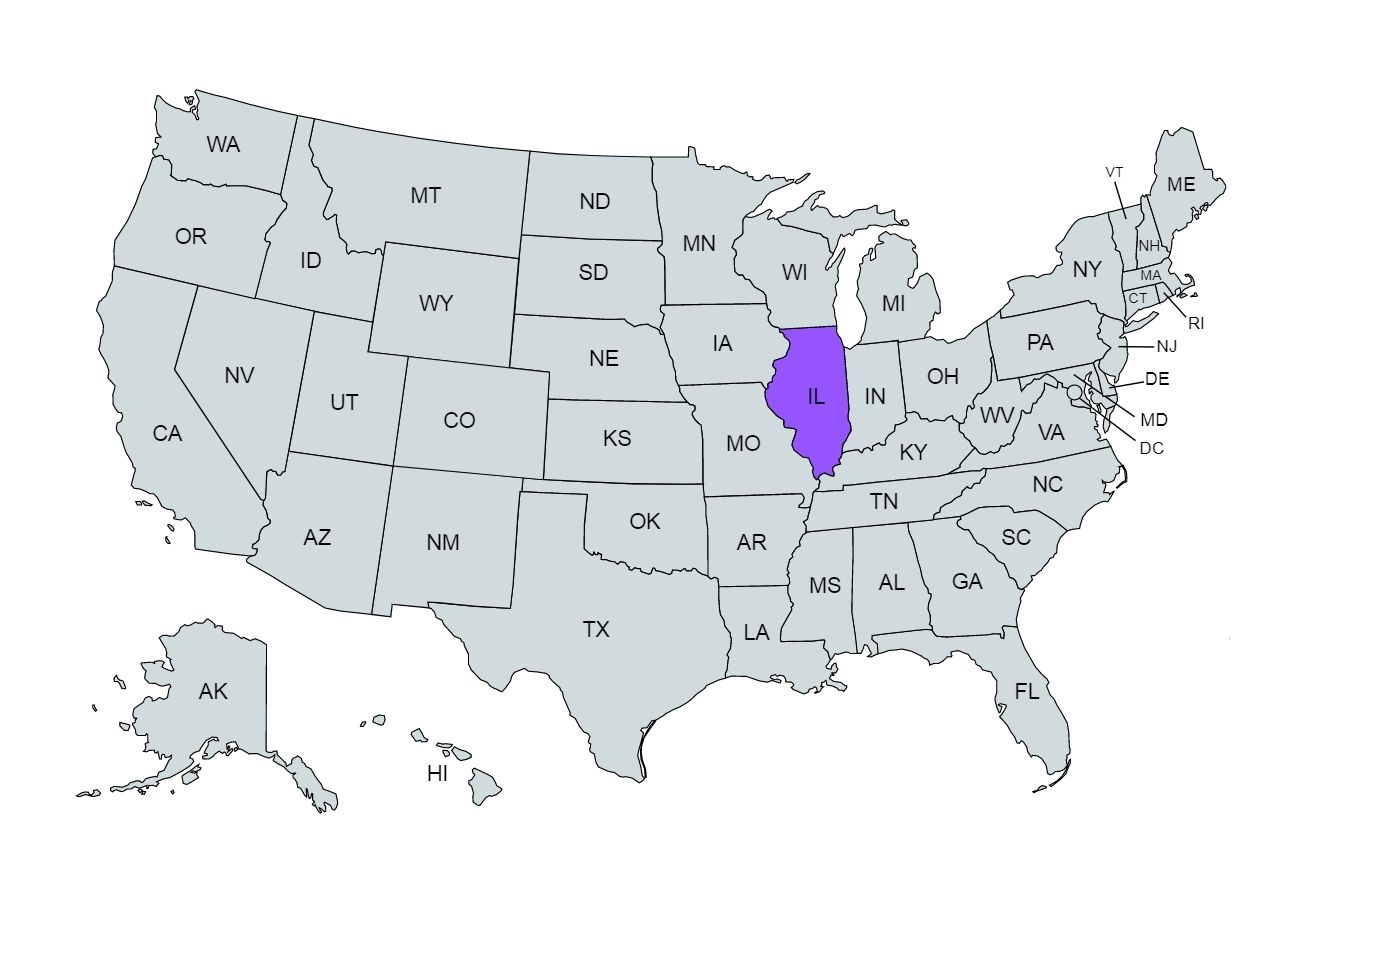 The U.S. map with the Illinois state marked in purple